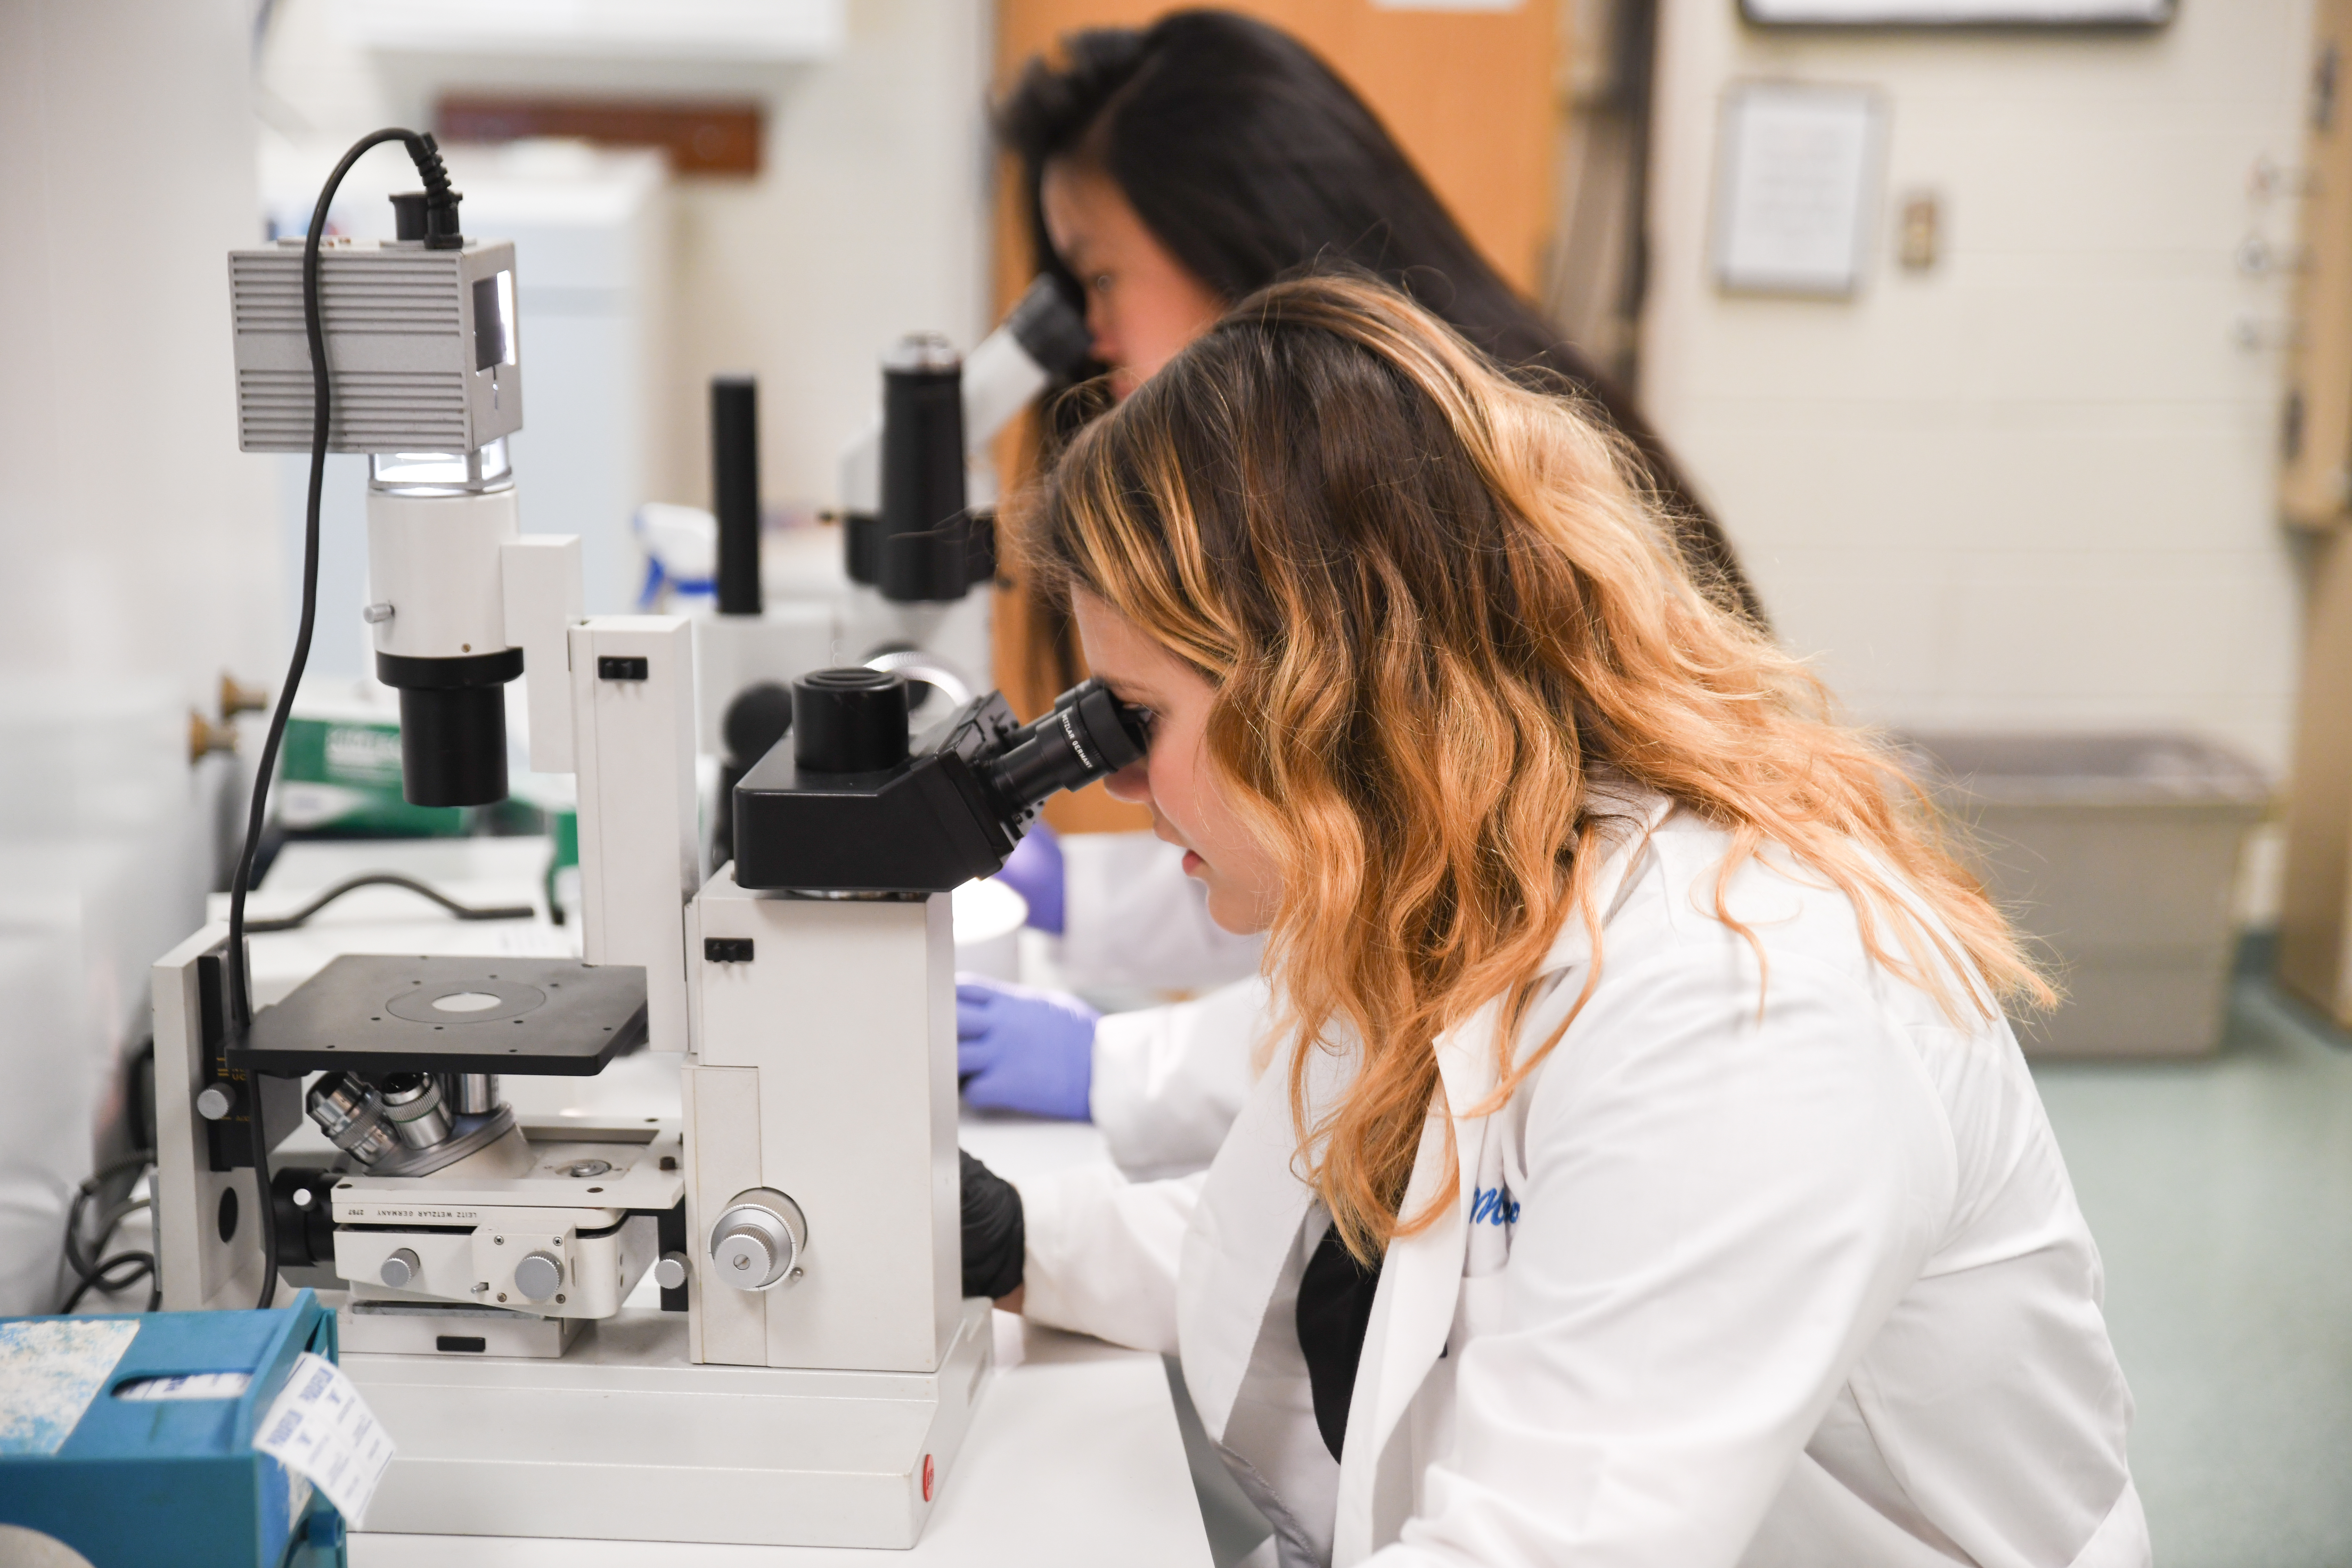 Two teenage girls in a research lab look into microscopes. Both are wearing lab coats and gloves.